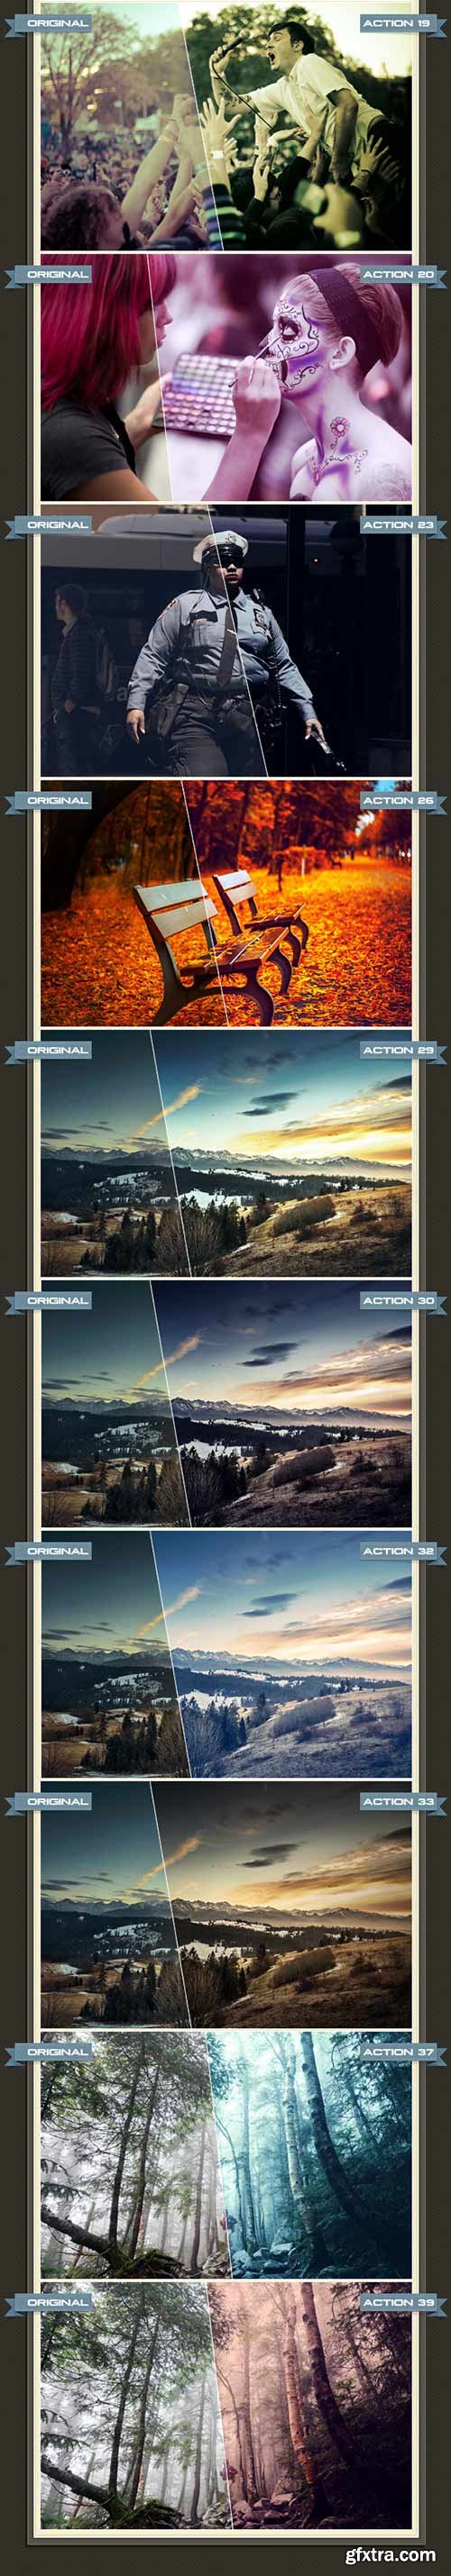 GraphicRiver - HDR - Photoshop Actions I 10069403